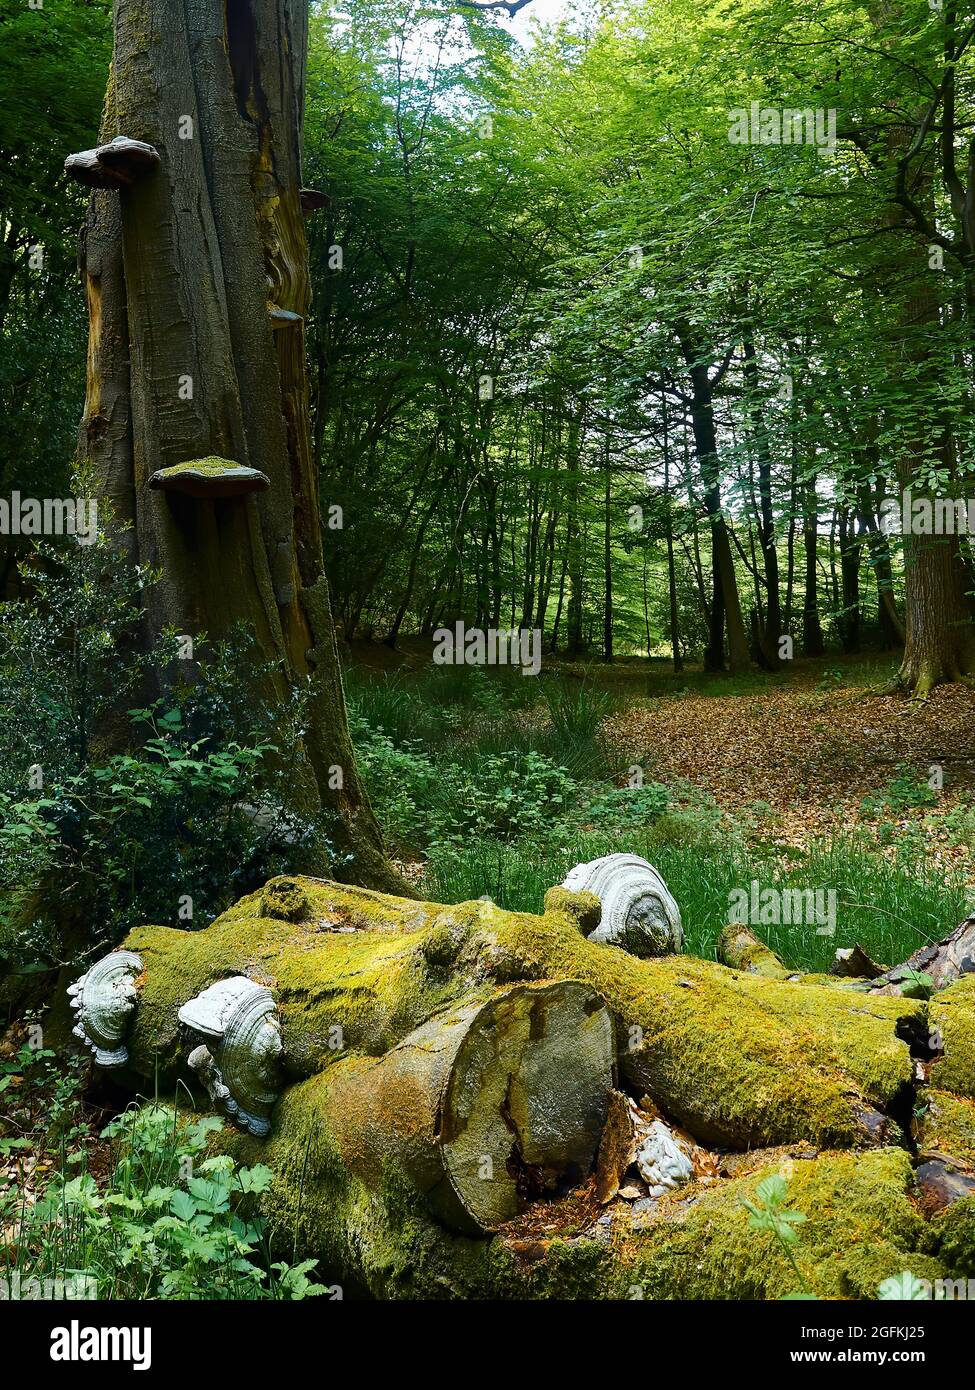 Colossal fungi, the size of dinner plants, on a fallen, moss covered tree trunk in a woodland clearing. Stock Photo